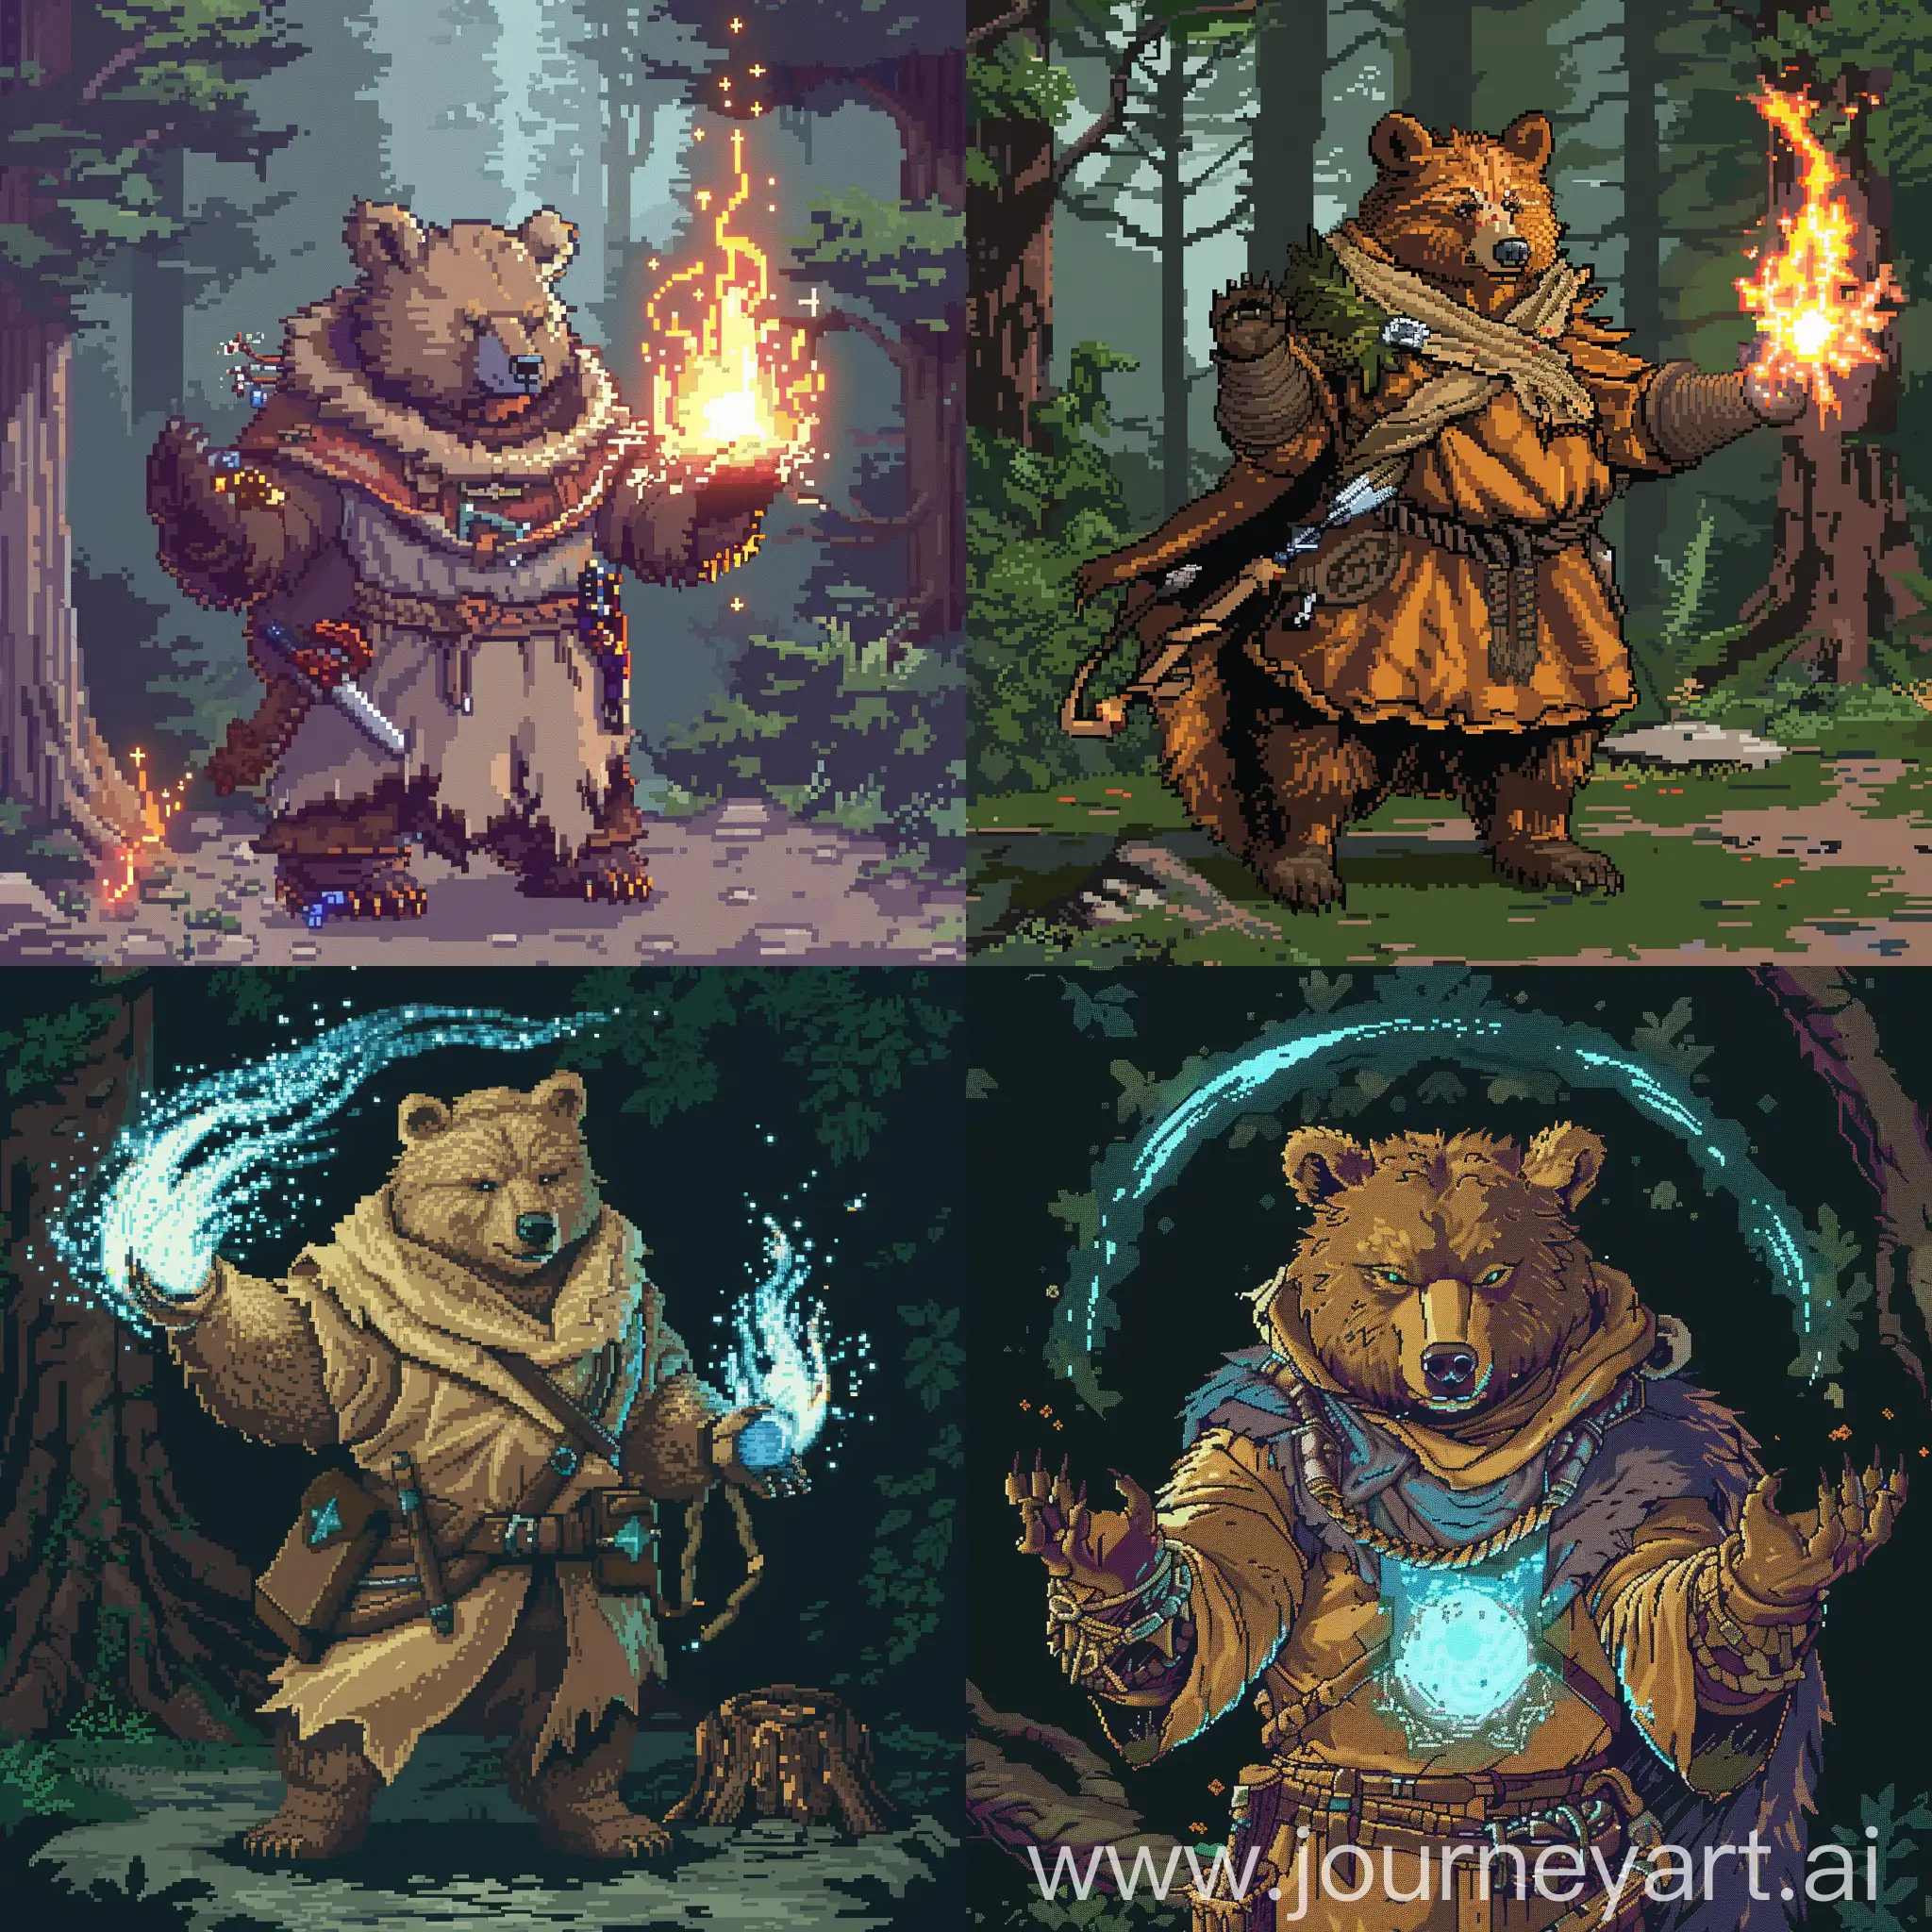 Create an image of a crypto-bear druid with the ability to control natural forces or communicate with spirits. Use the pixel style to convey its connection with magic and ancient legends."